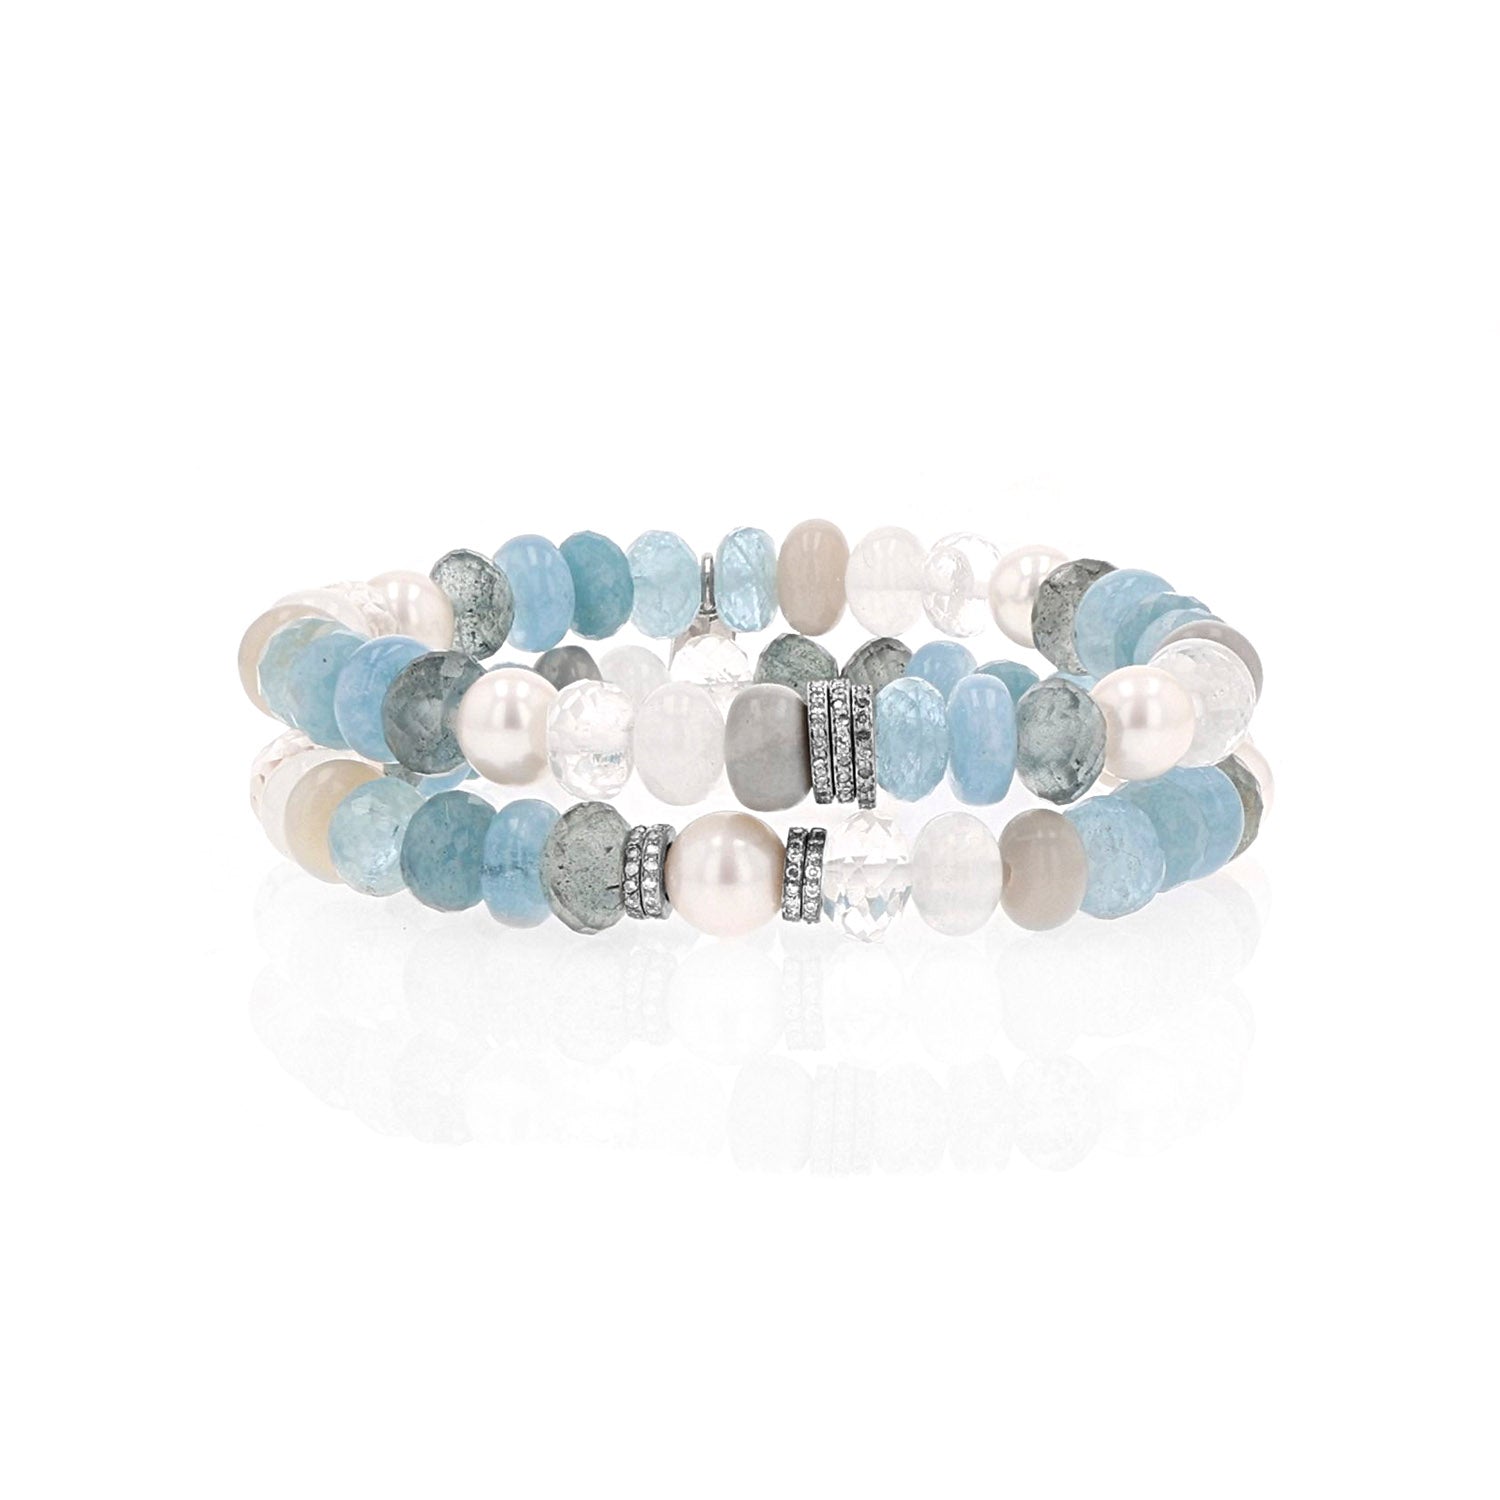 Pearl and Blue Gemstone Mix Bracelet with 3 Diamond Rondelles - 8mm  B0003976 - TBird